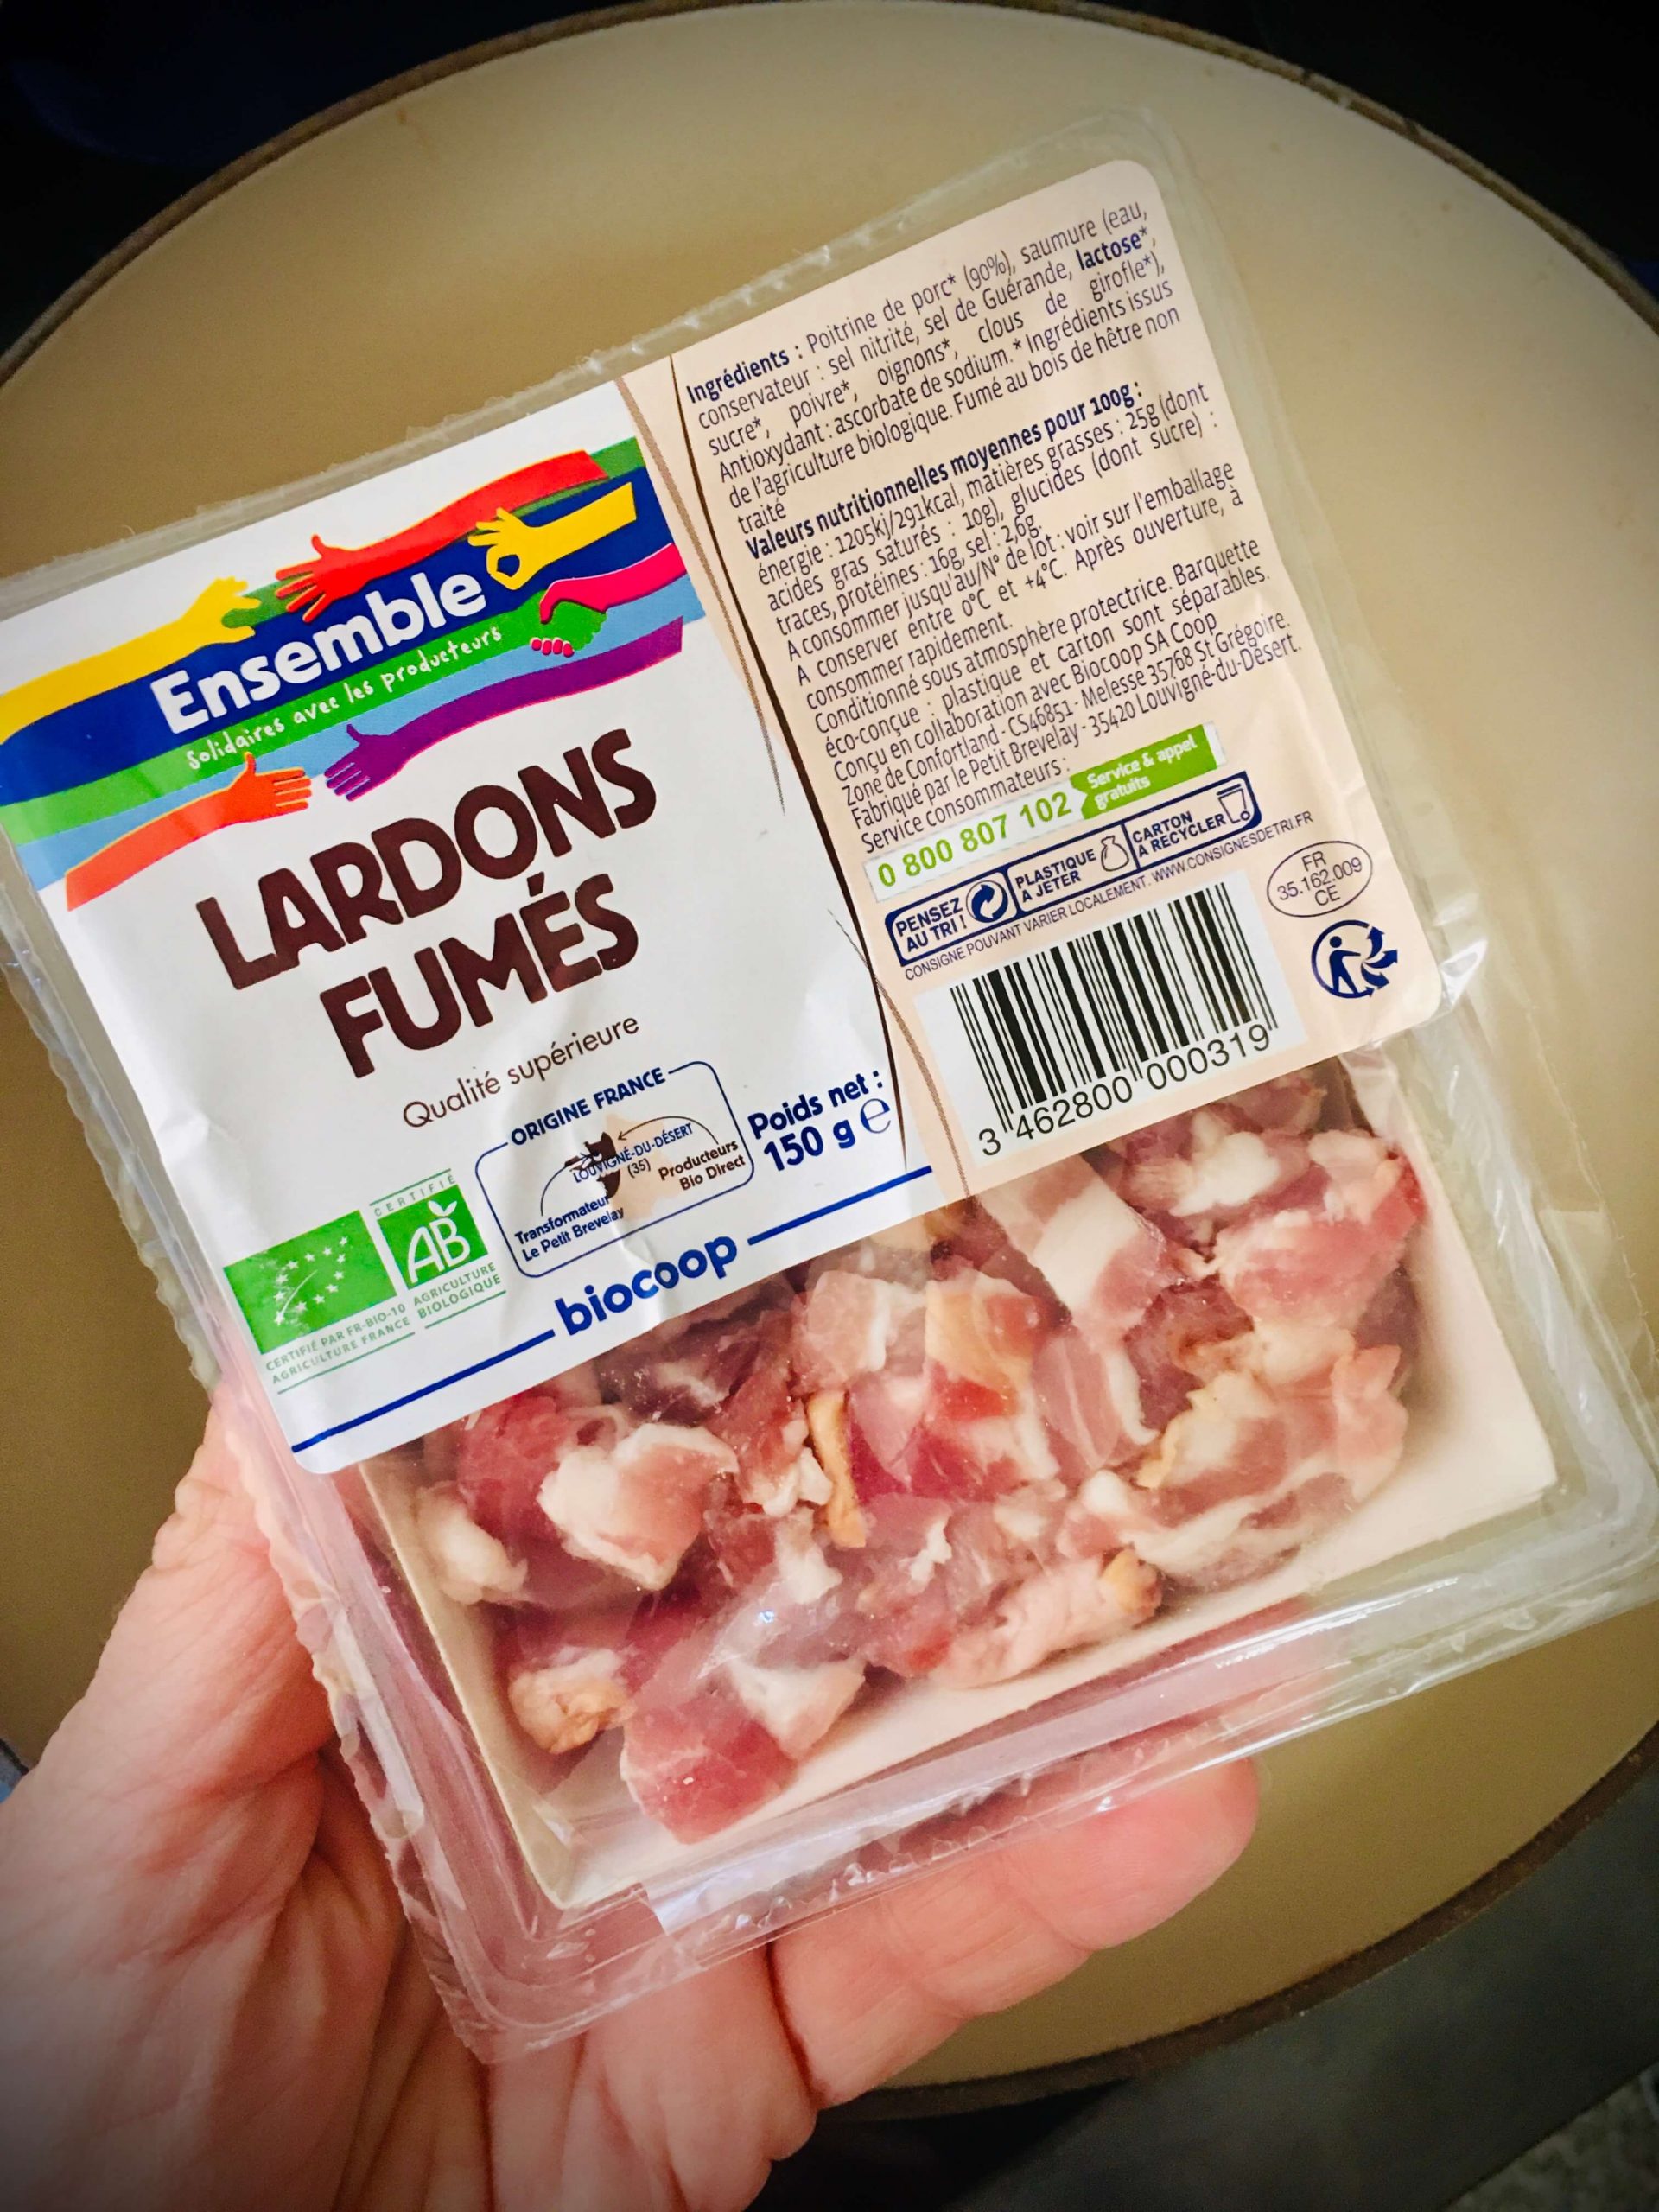 A container of lardons fumes